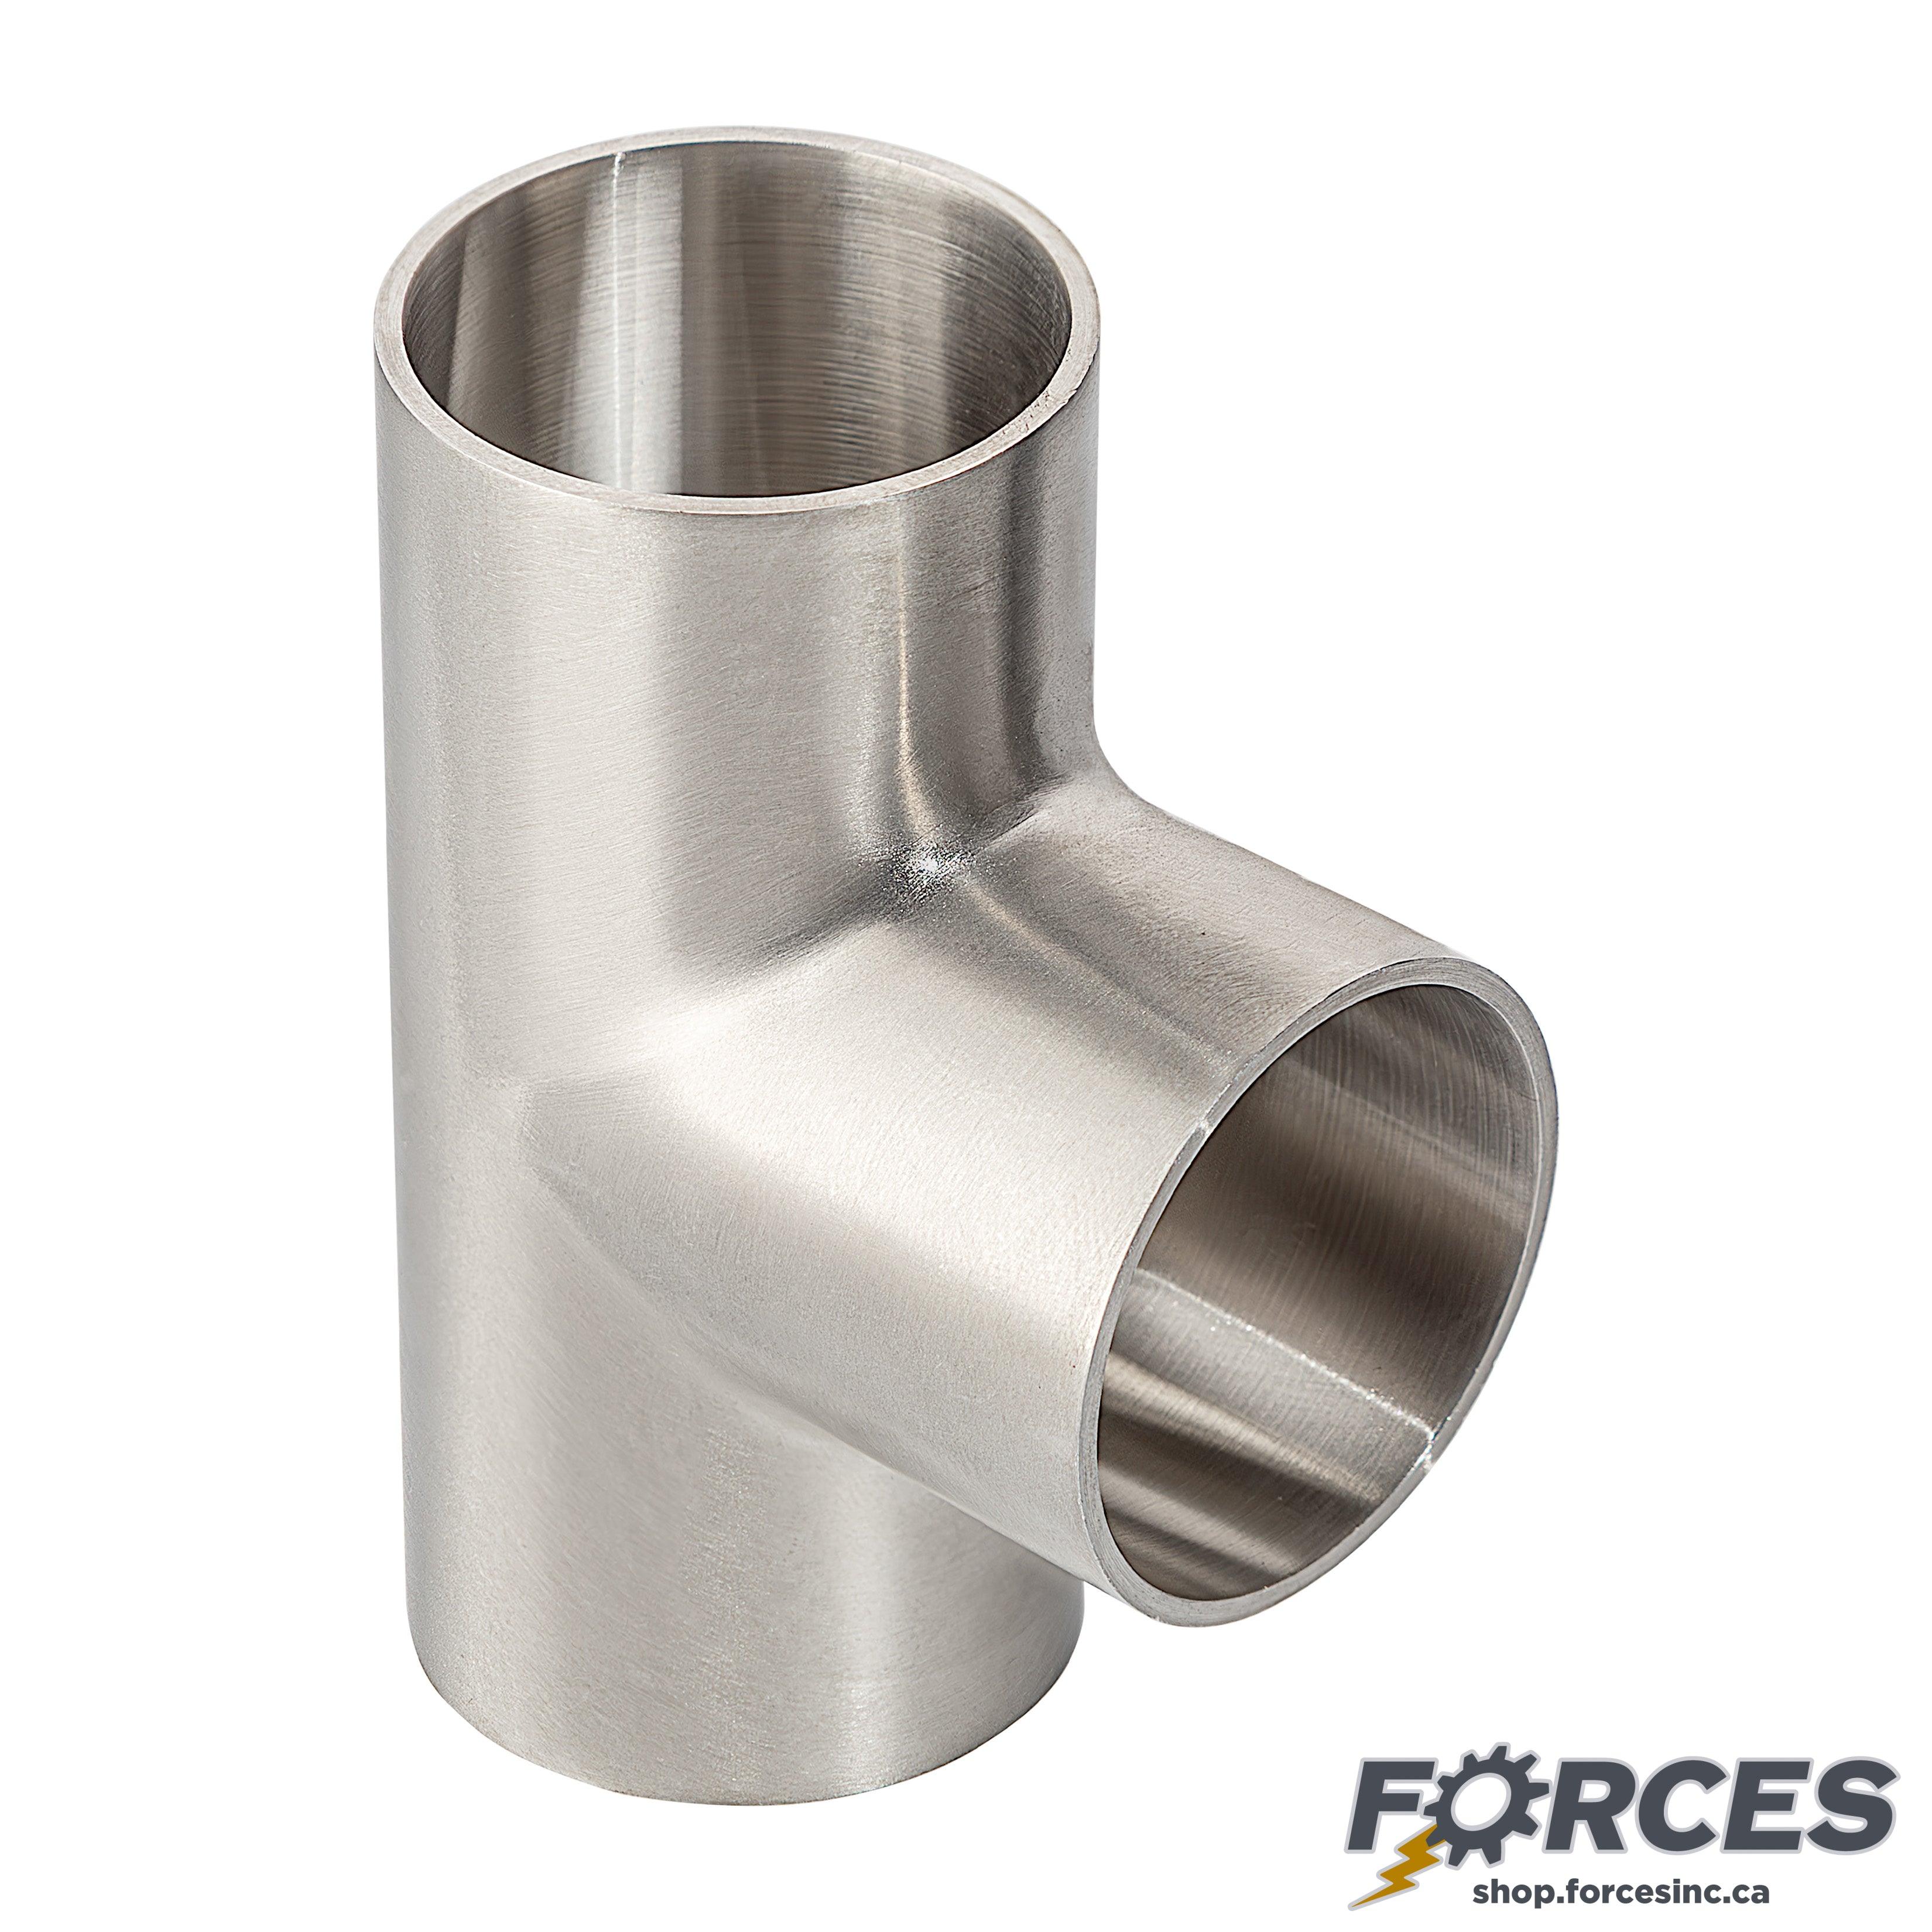 1-1/2" Butt Weld Short Tee - Stainless Steel 304 - Forces Inc